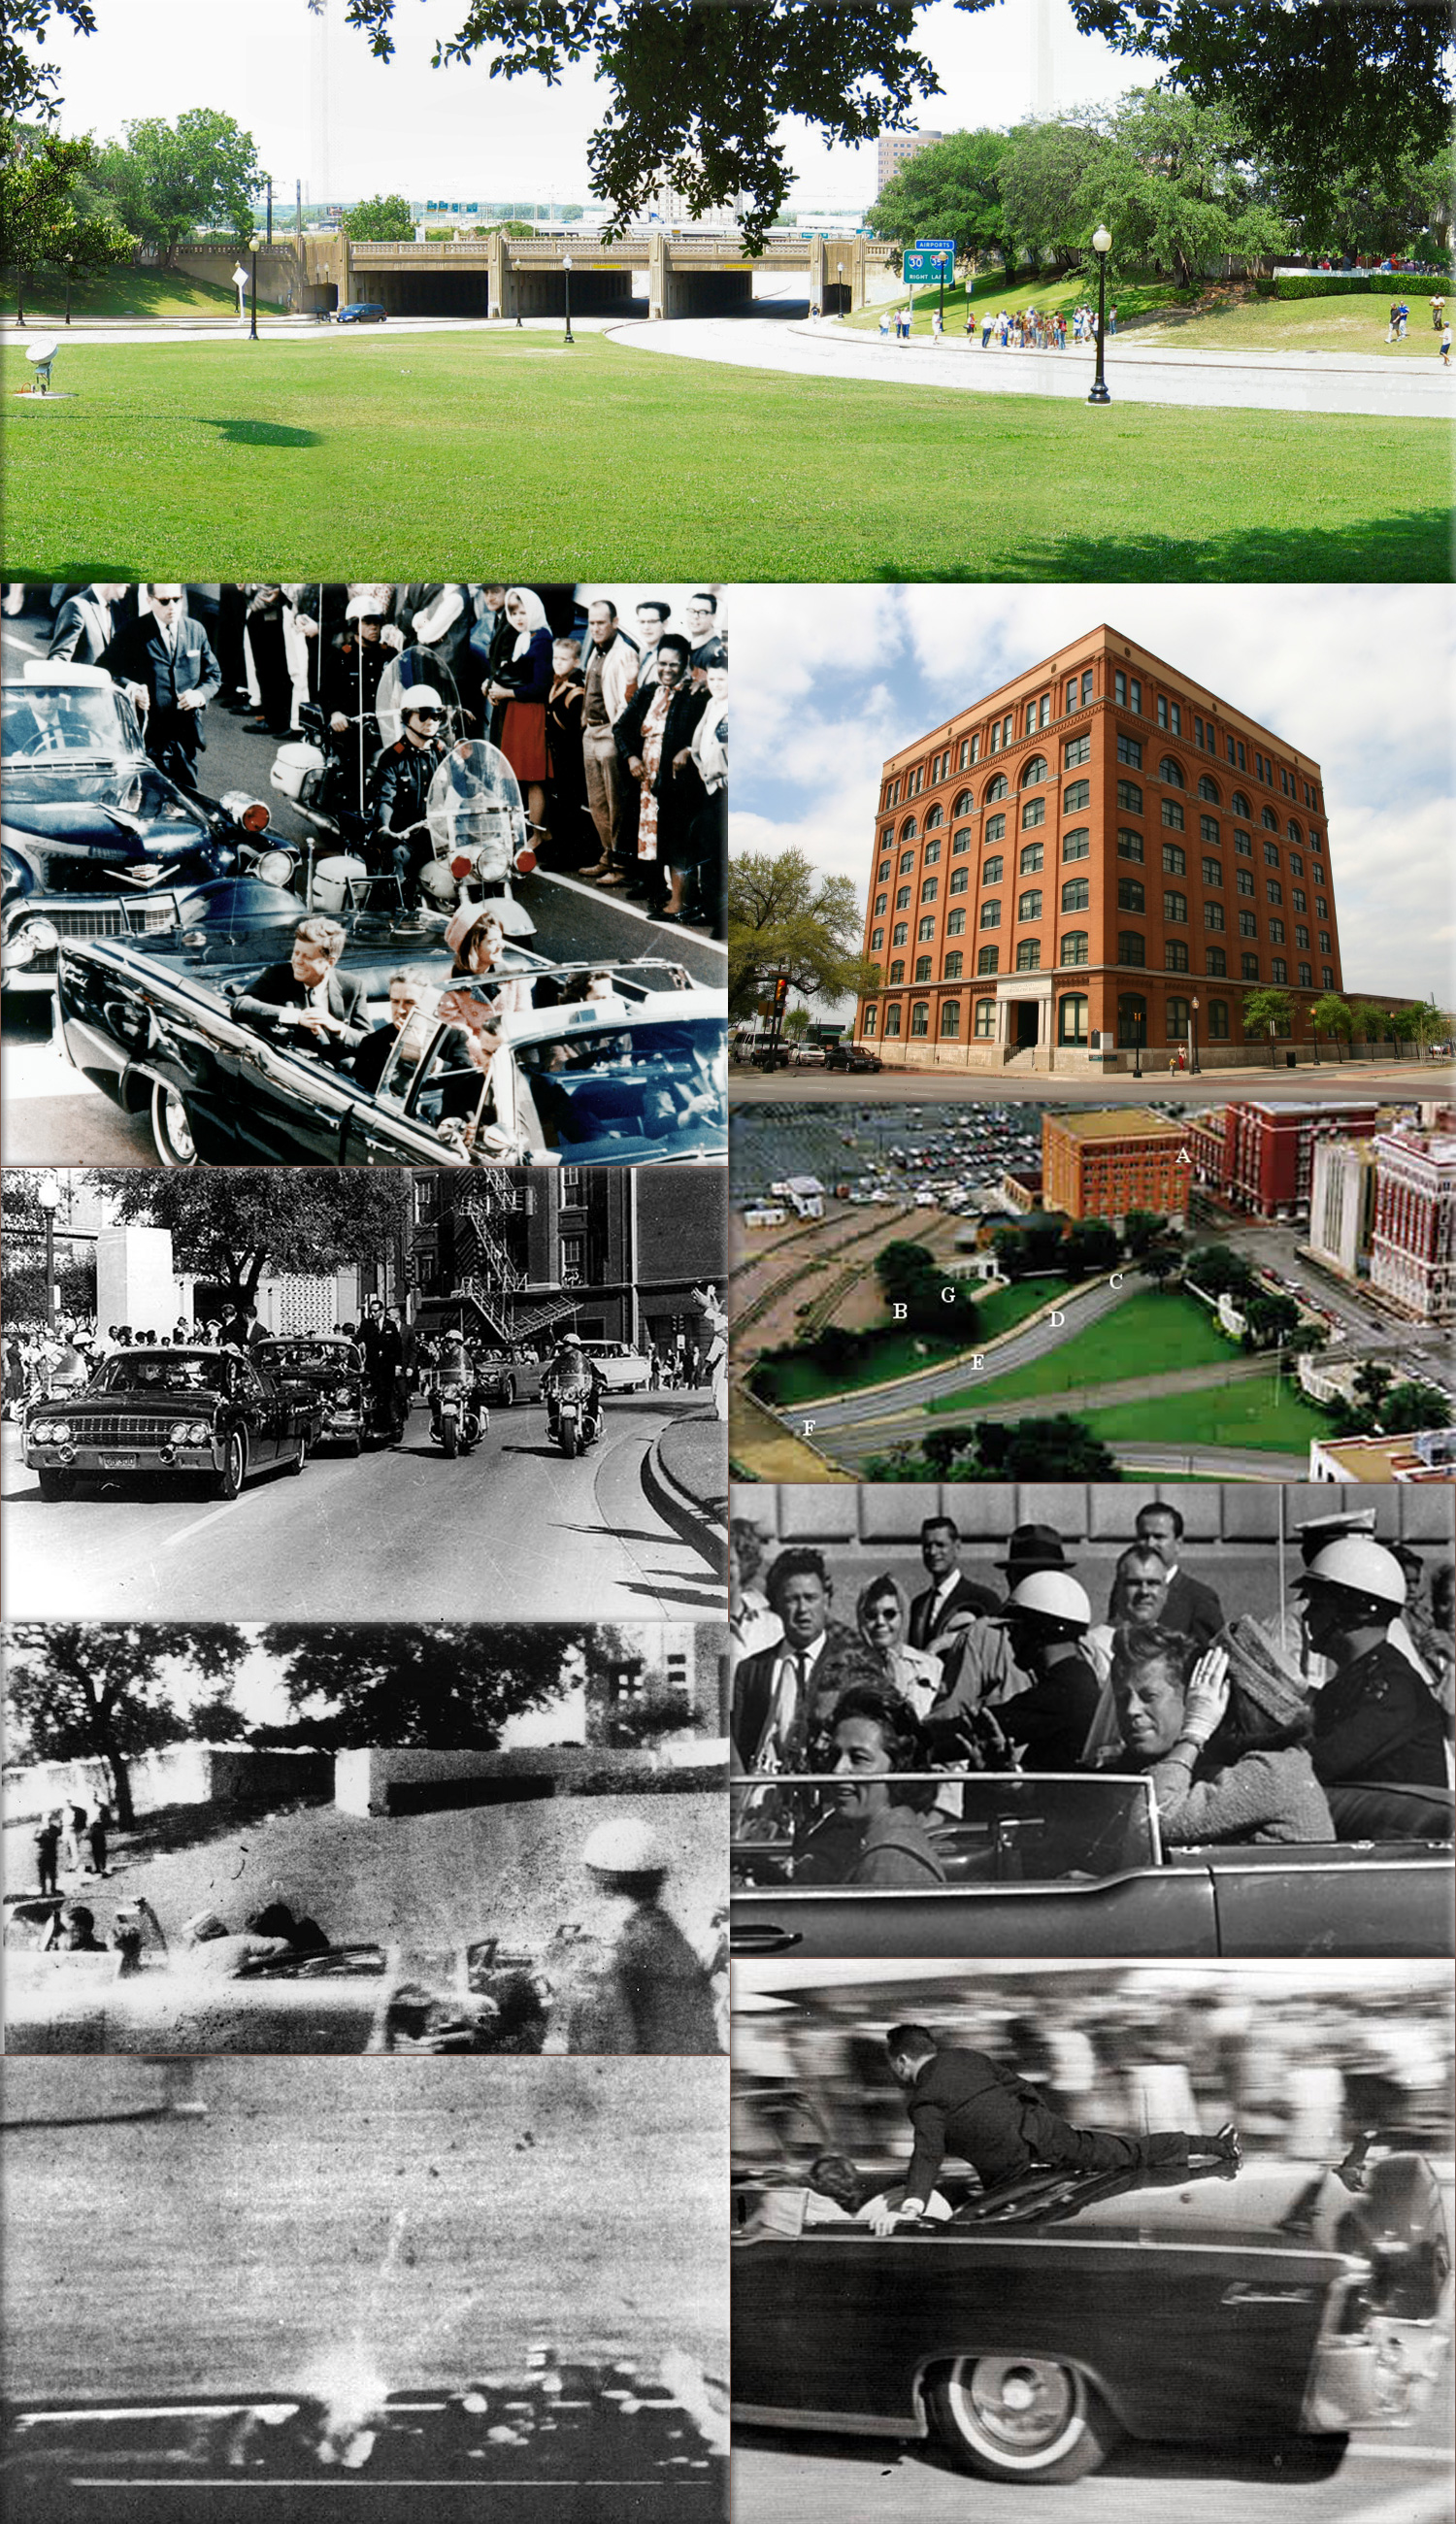 Assassination_of_John_F._Kennedy: In Dallas, Texas, US President John F. Kennedy is assassinated and Texas Governor John B. Connally is seriously wounded